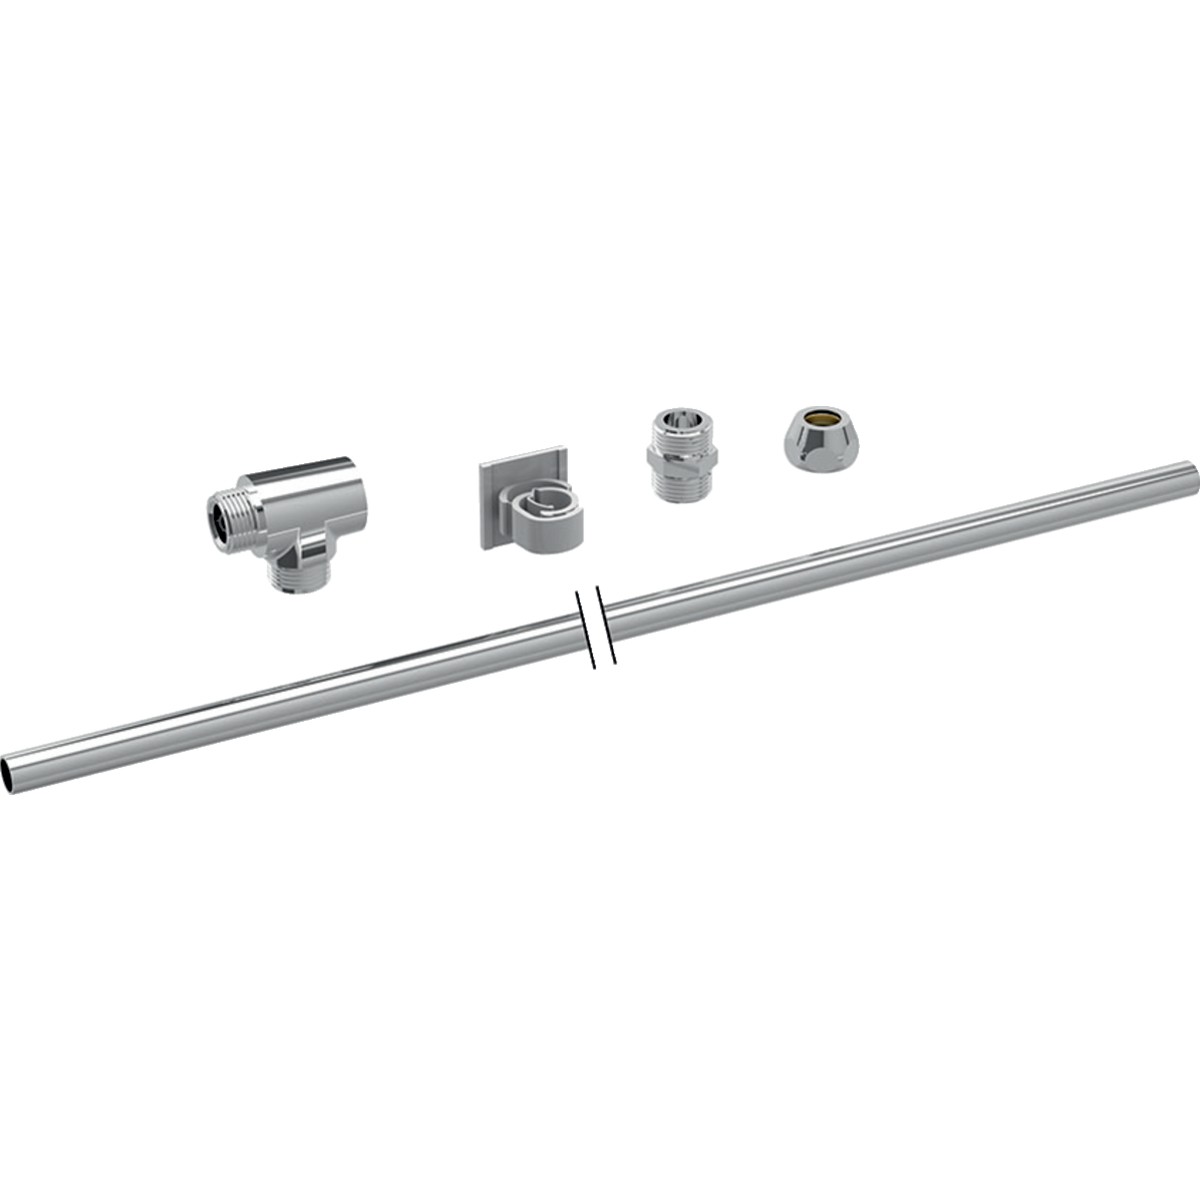 Geberit Tuma Exposed Water supply connection set for Geberit exposed cisterns [147034001]